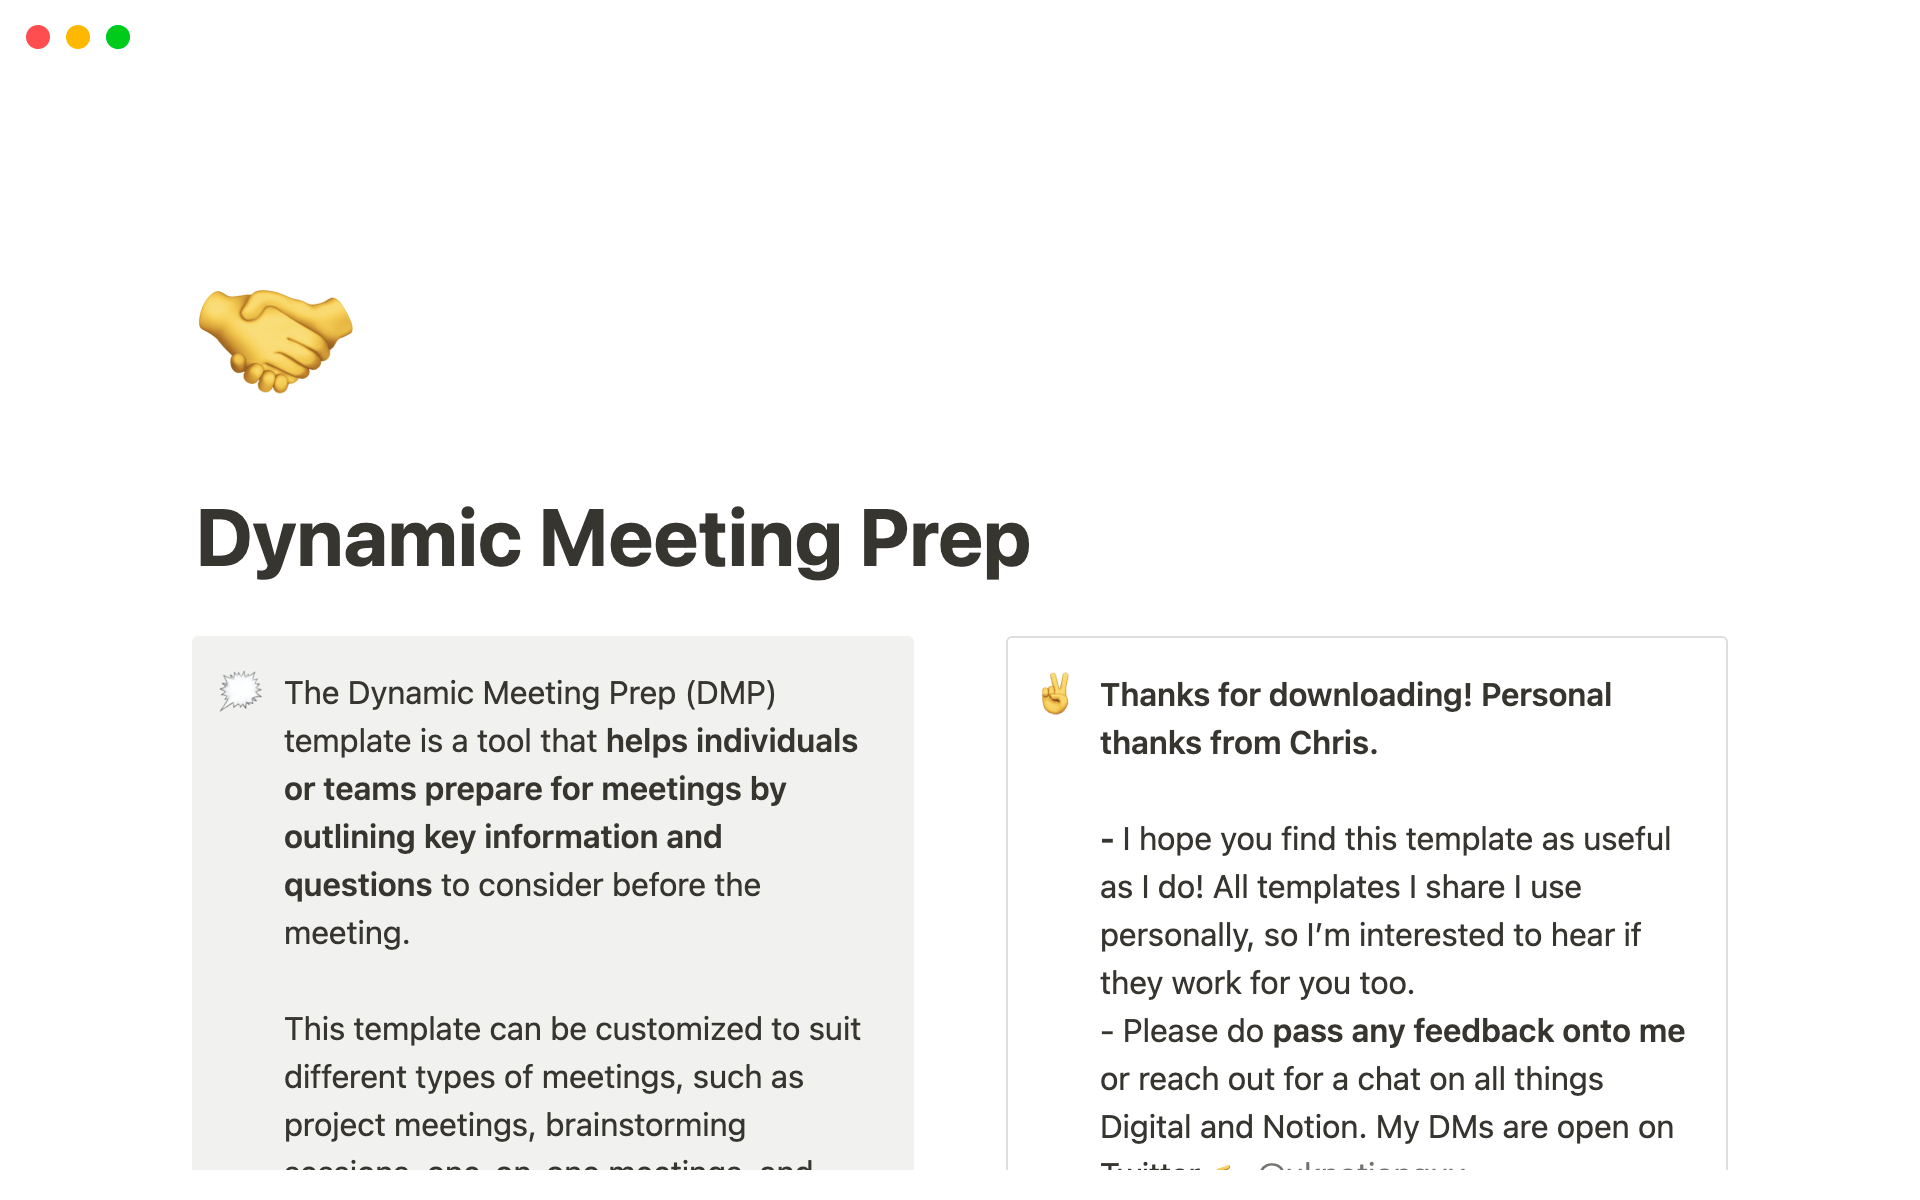 The Dynamic Meeting Prep (DMP) template is a tool that helps individuals or teams prepare for meetings, by outlining key information and questions to consider before the meeting.